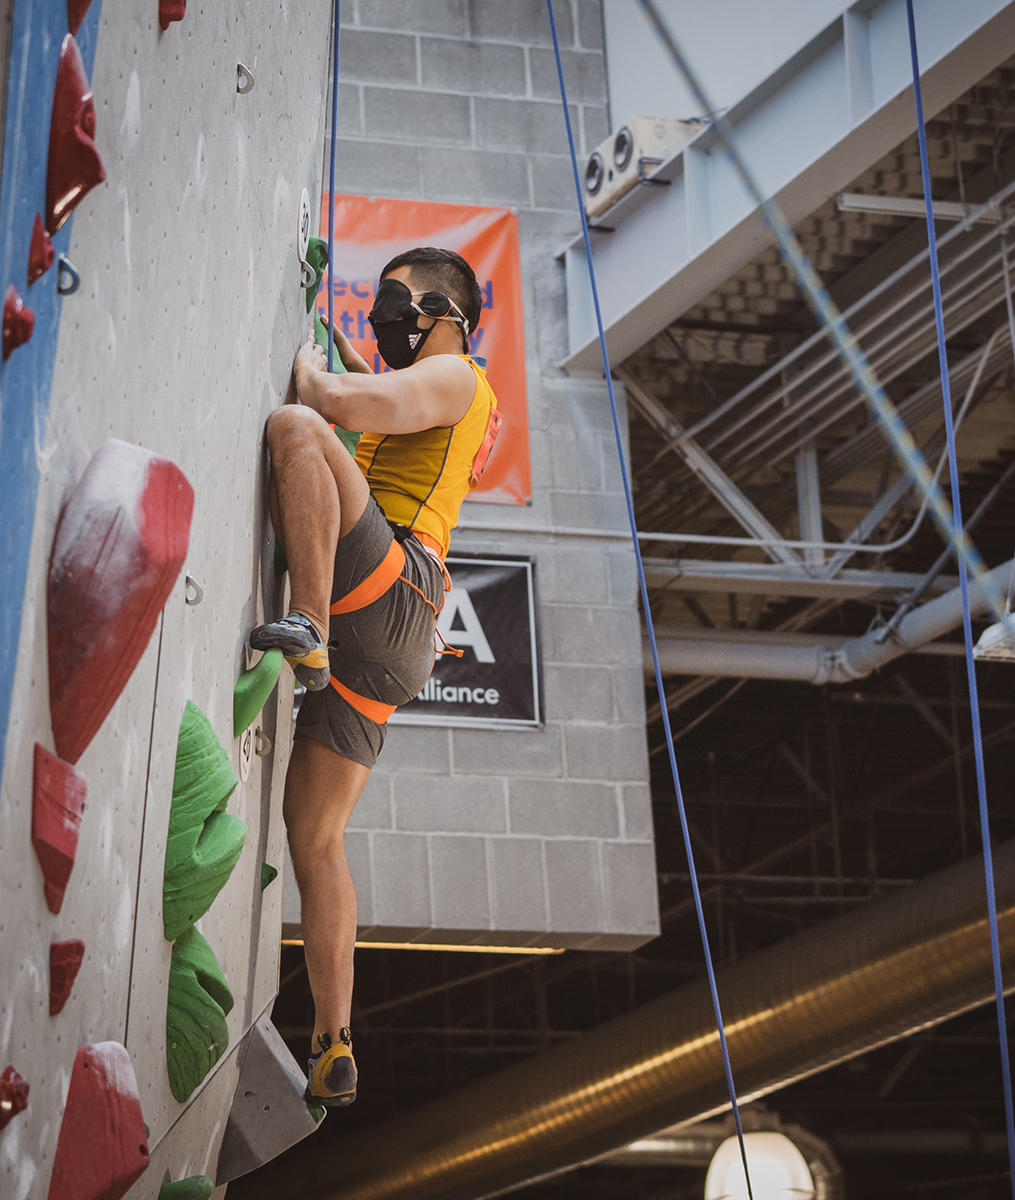 Paraclimbing athlete with a blindfold on is climbing up a indoor rock wall on top rope.